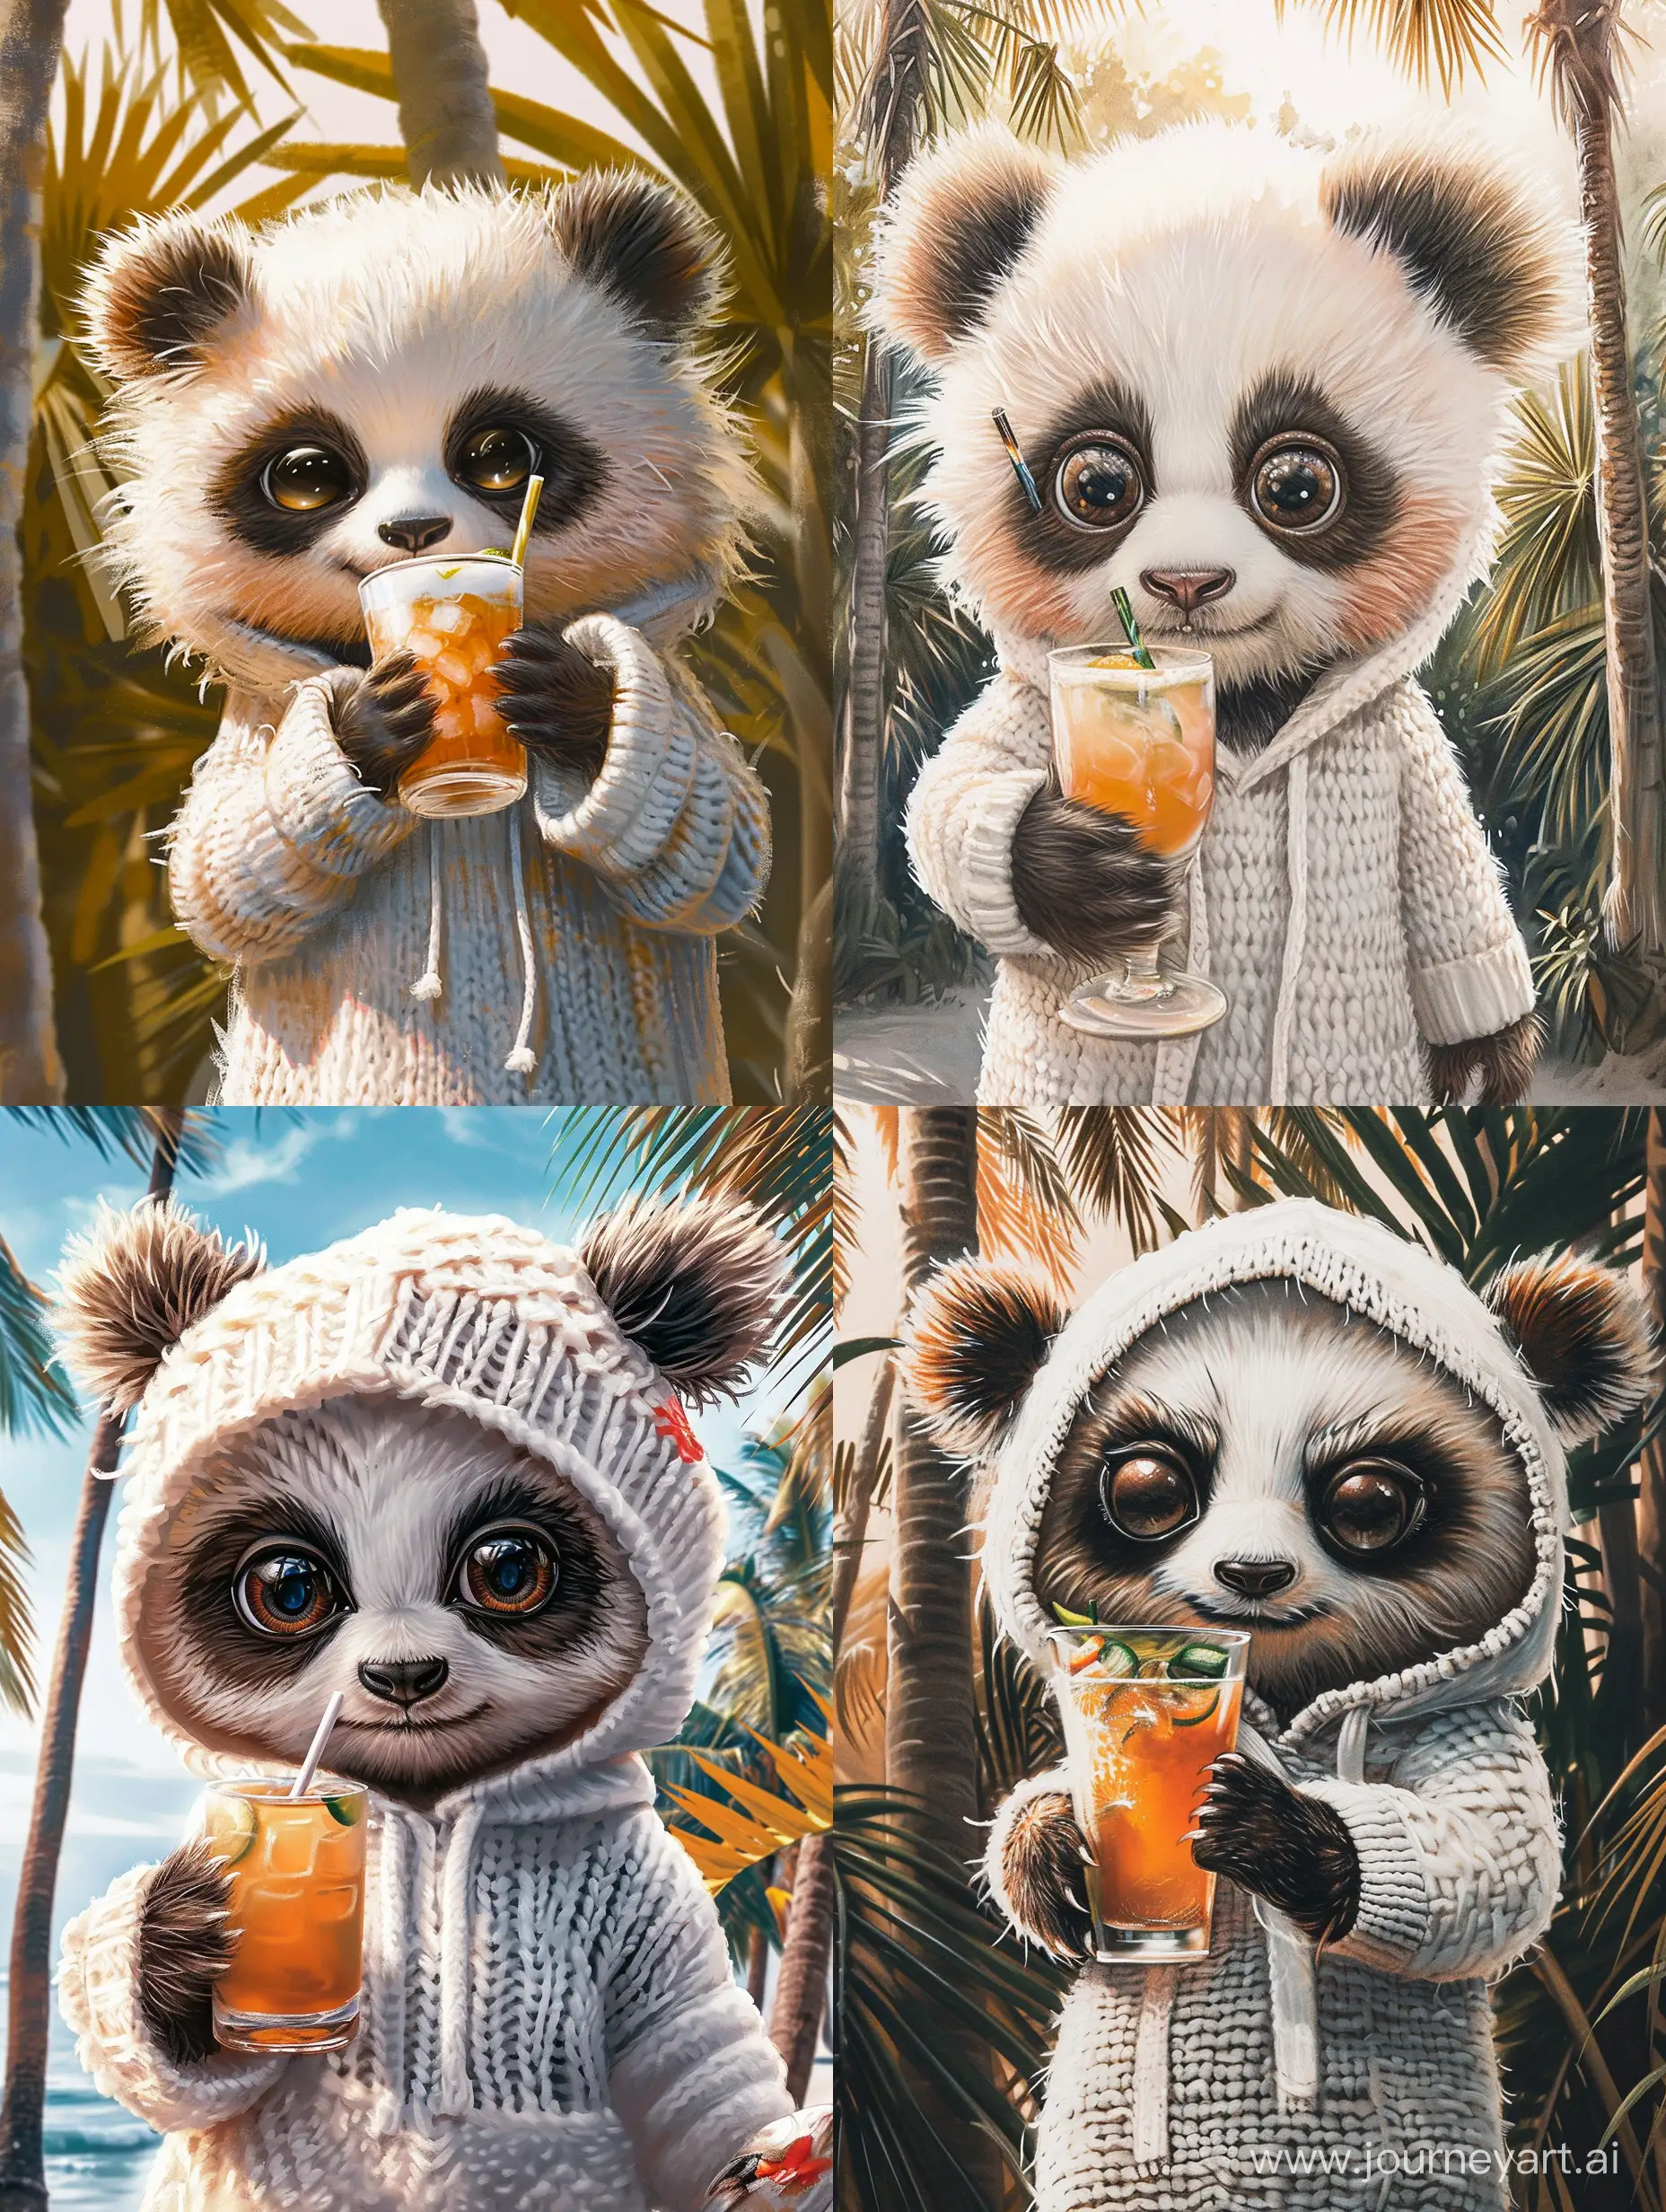 Adorable-Panda-with-Cocktail-in-Sunny-Paradise